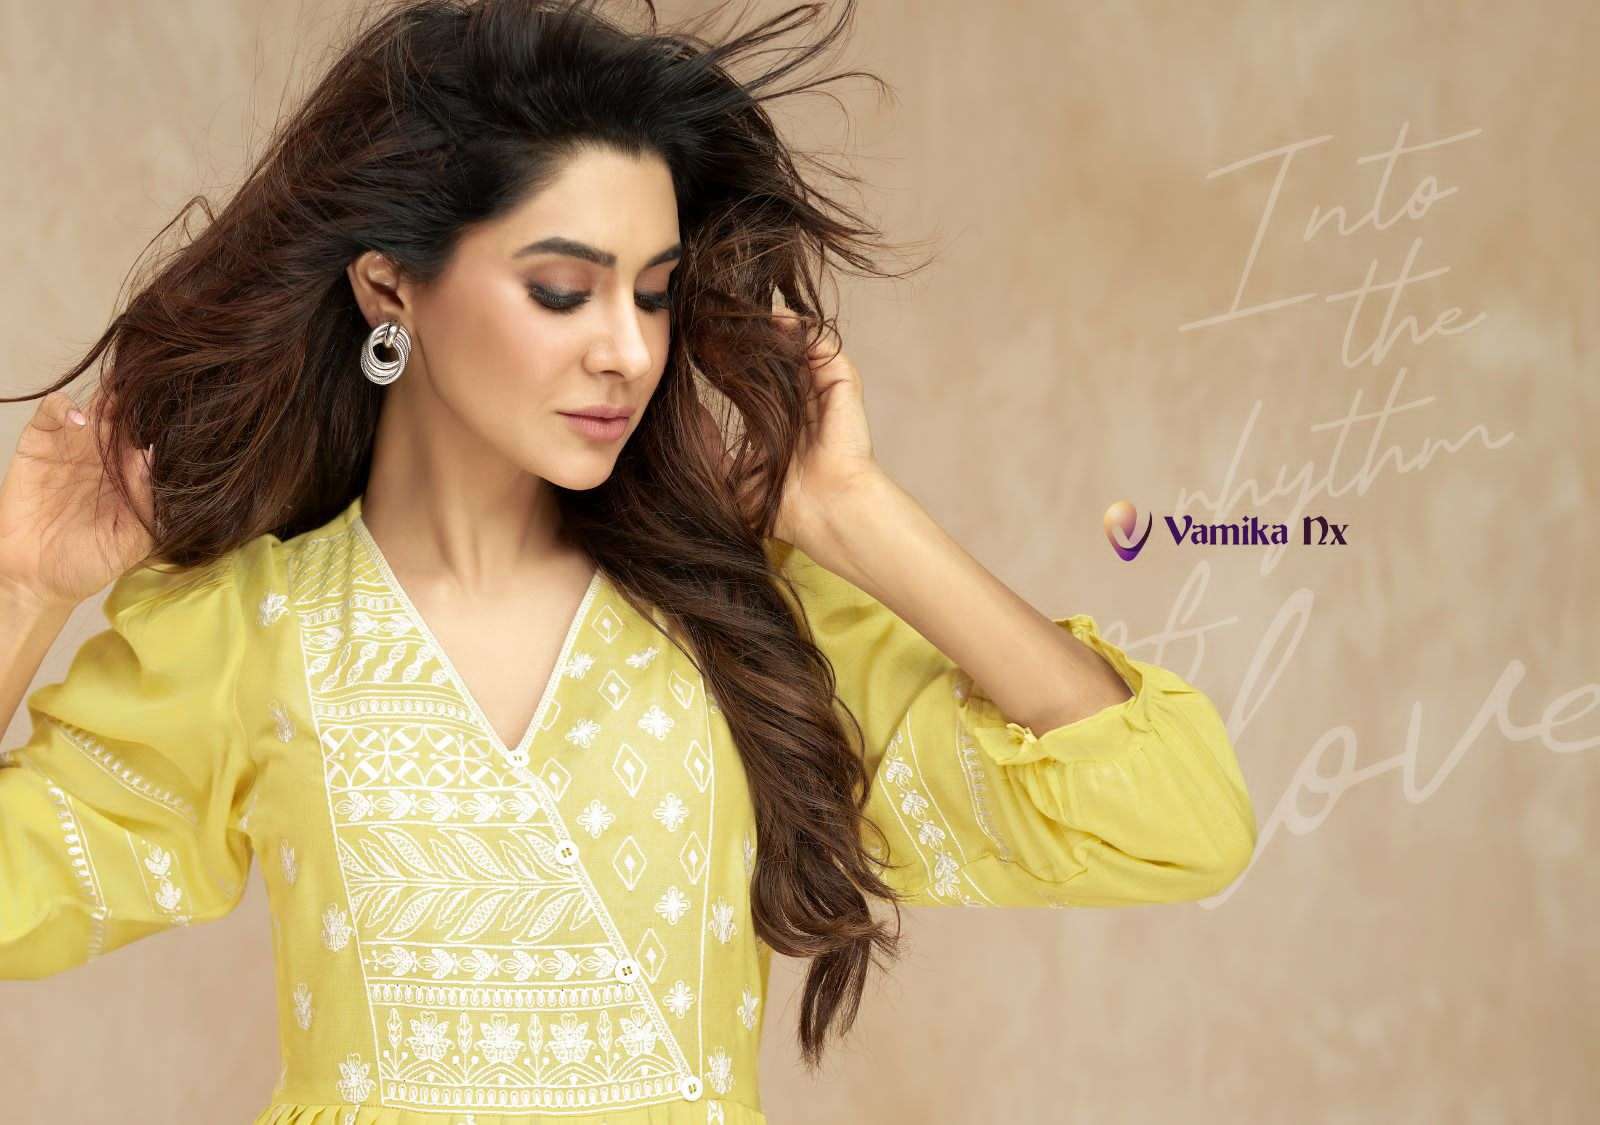 Vamika%20Fashion%20Ibadat%20Rayon%20with%20fancy%20TUnic%20Style%20Kurti%20collection%20at%20best%20rate%20(1) 0 2023 10 19 12 44 11